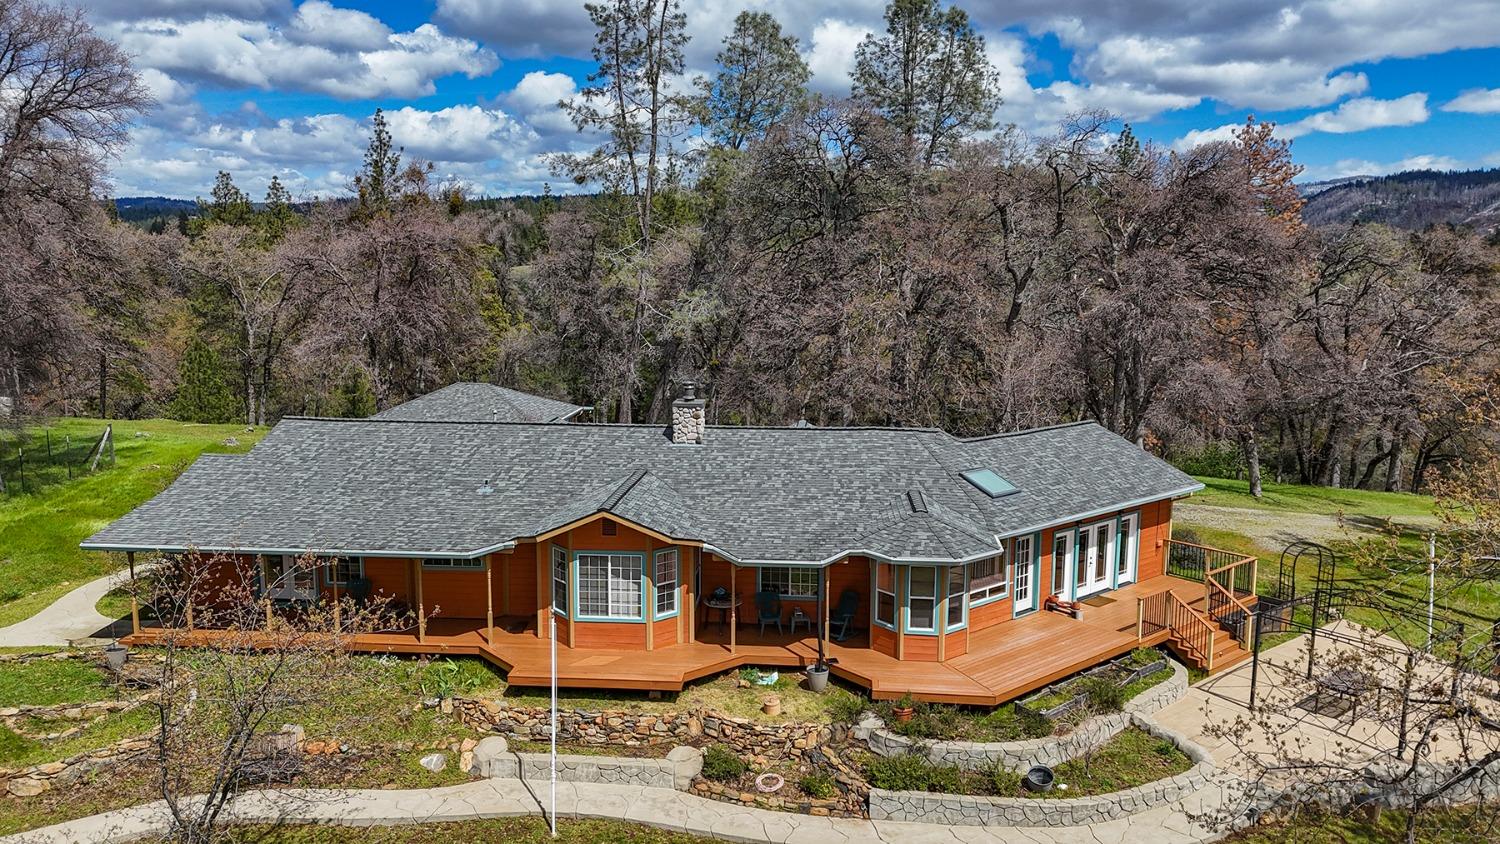 Photo of 2344 Four Springs Trl in Placerville, CA